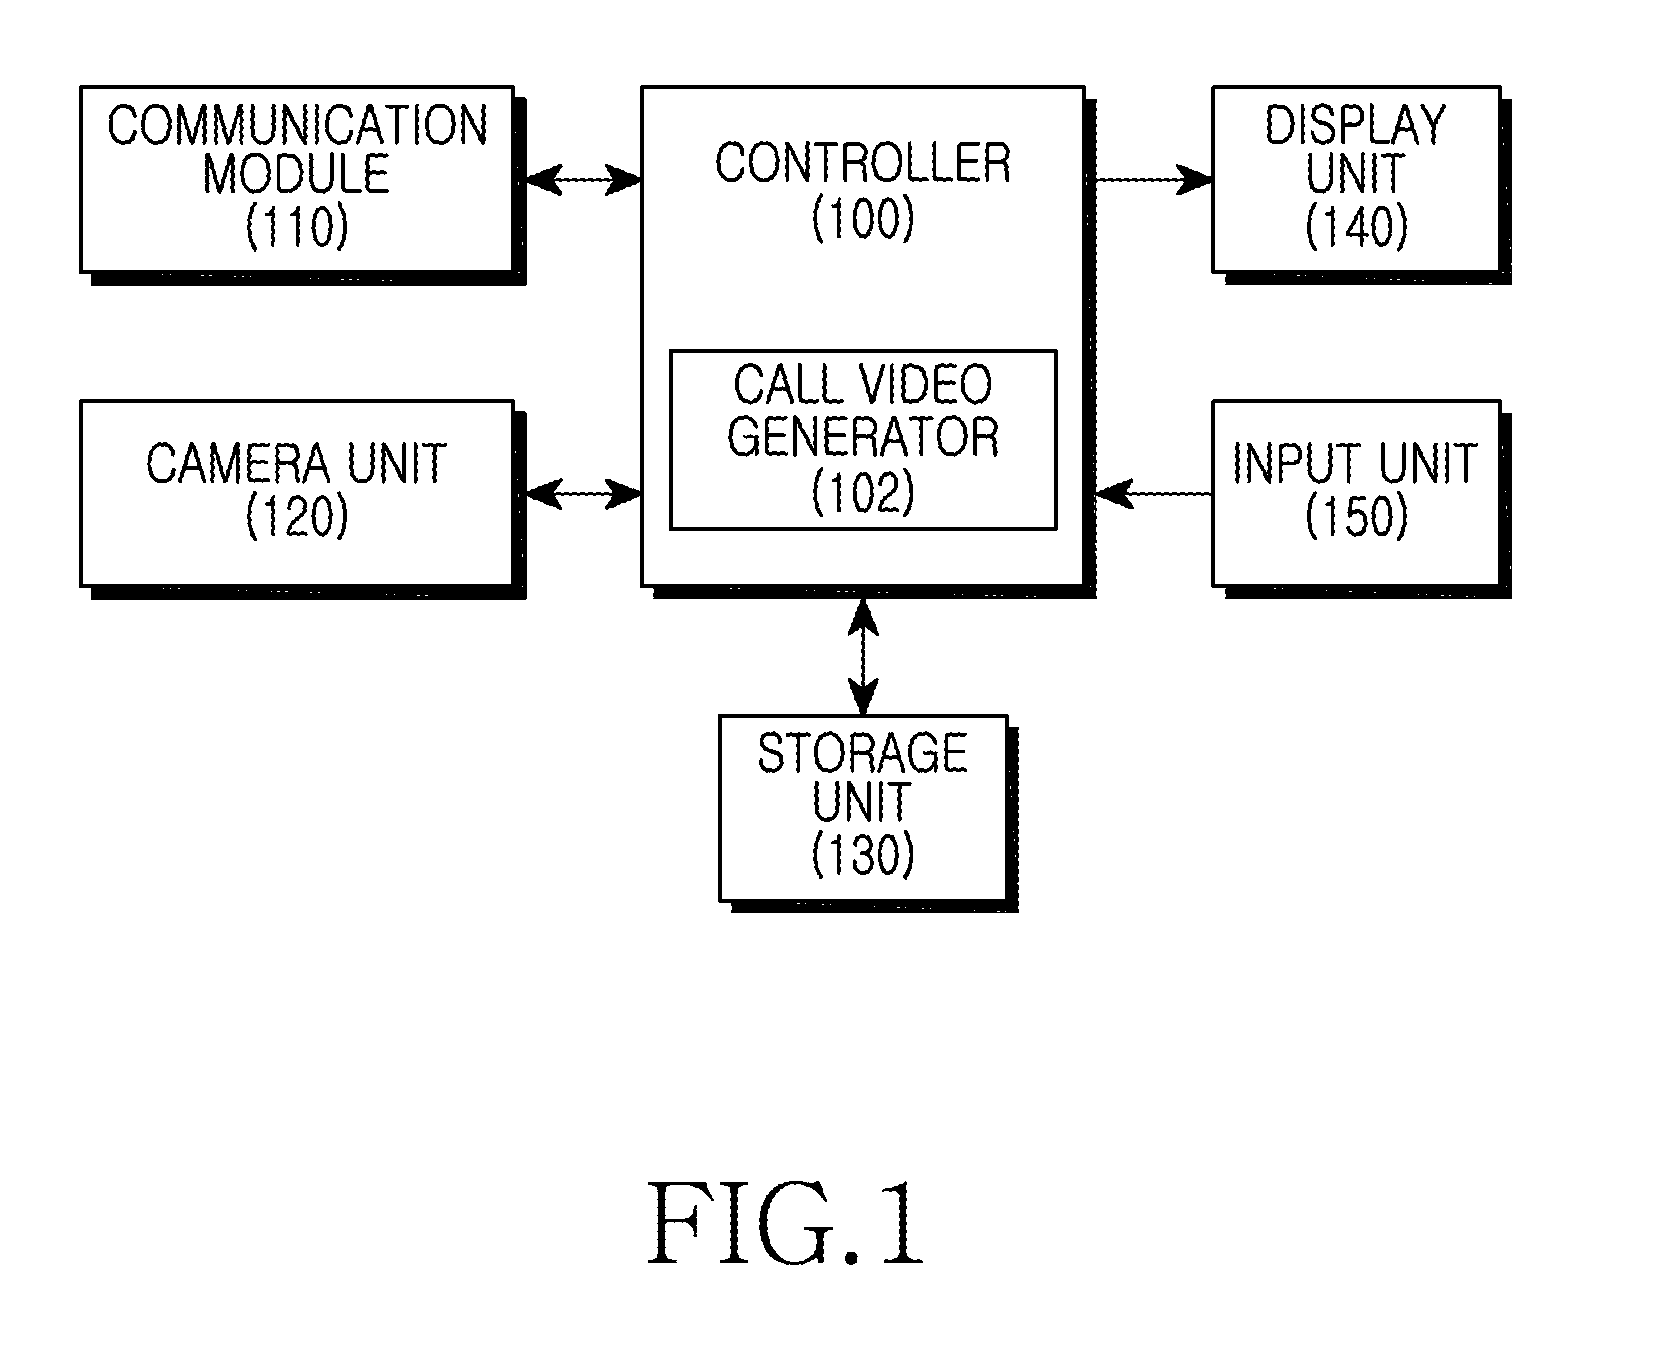 Method and apparatus for video call in a mobile terminal